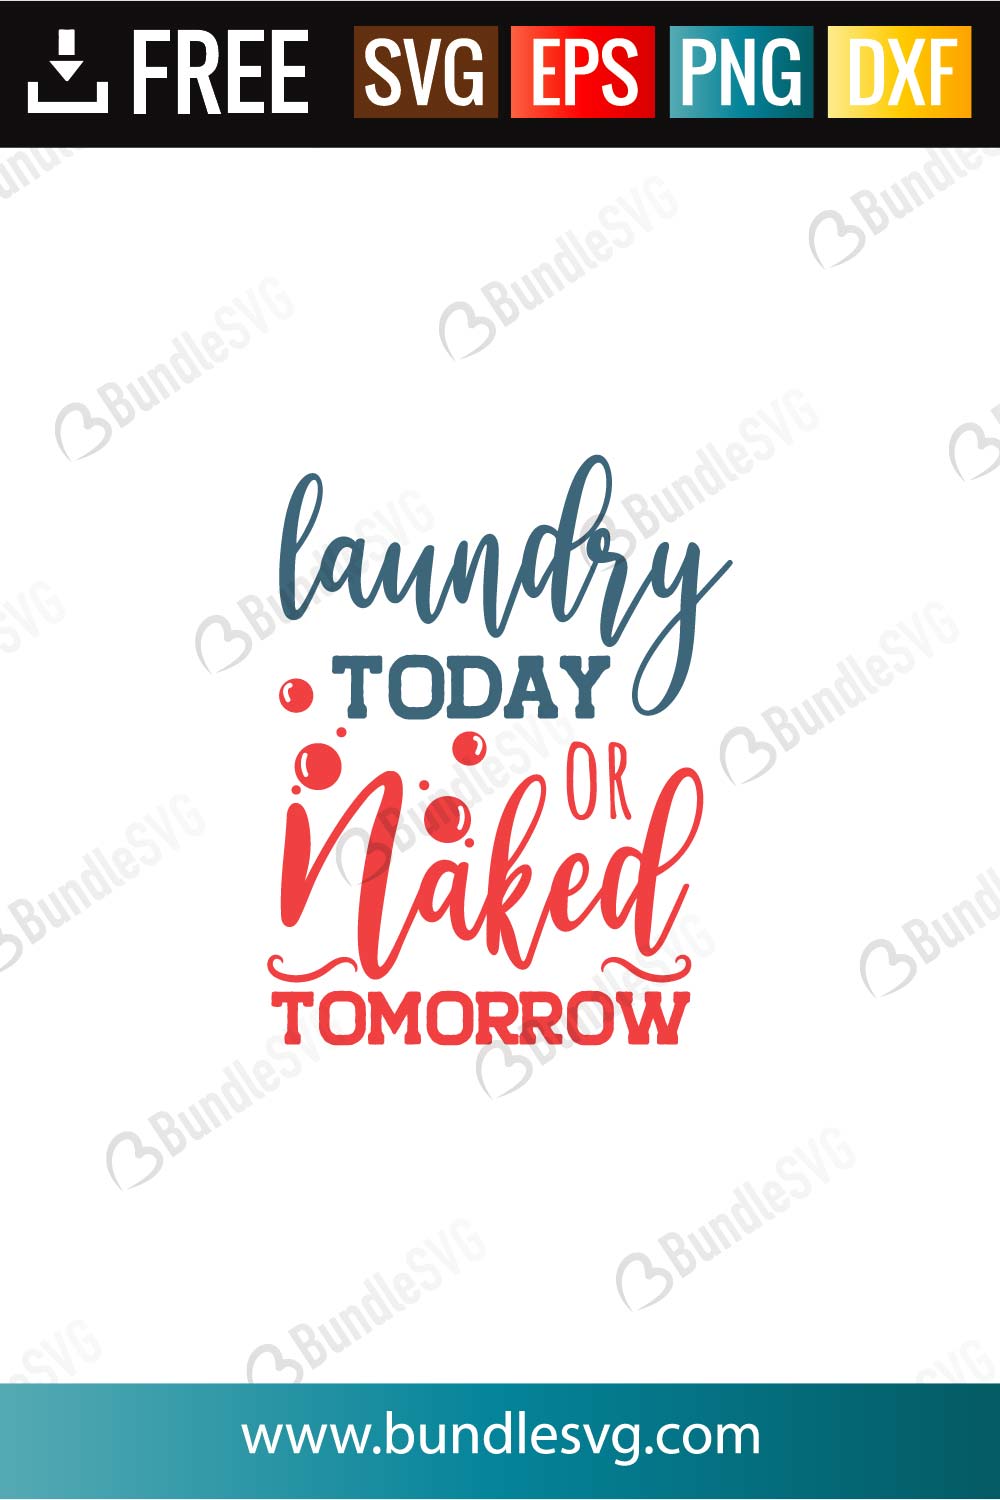 Download Laundry Today Or Naked Tomorrow Svg Cut Files Bundlesvg